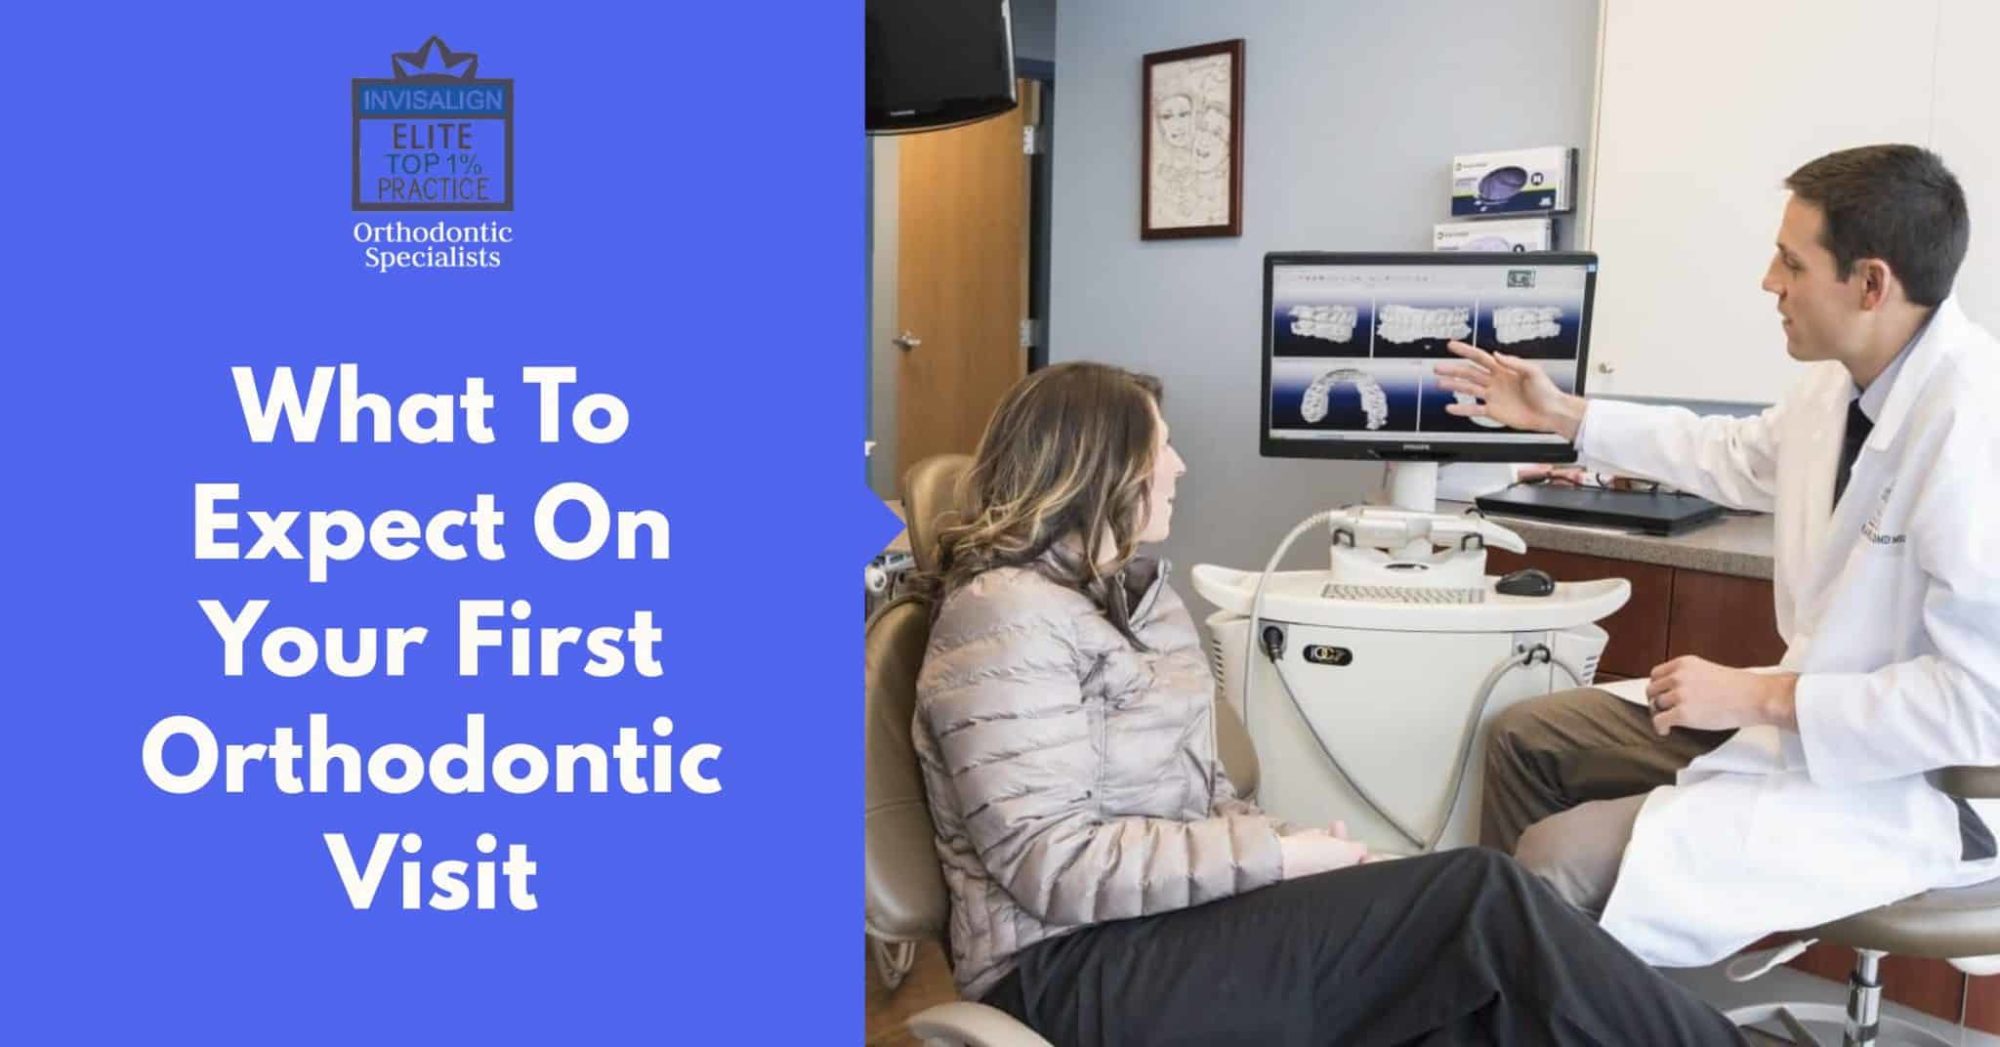 What To Expect On Your First Orthodontic Visit